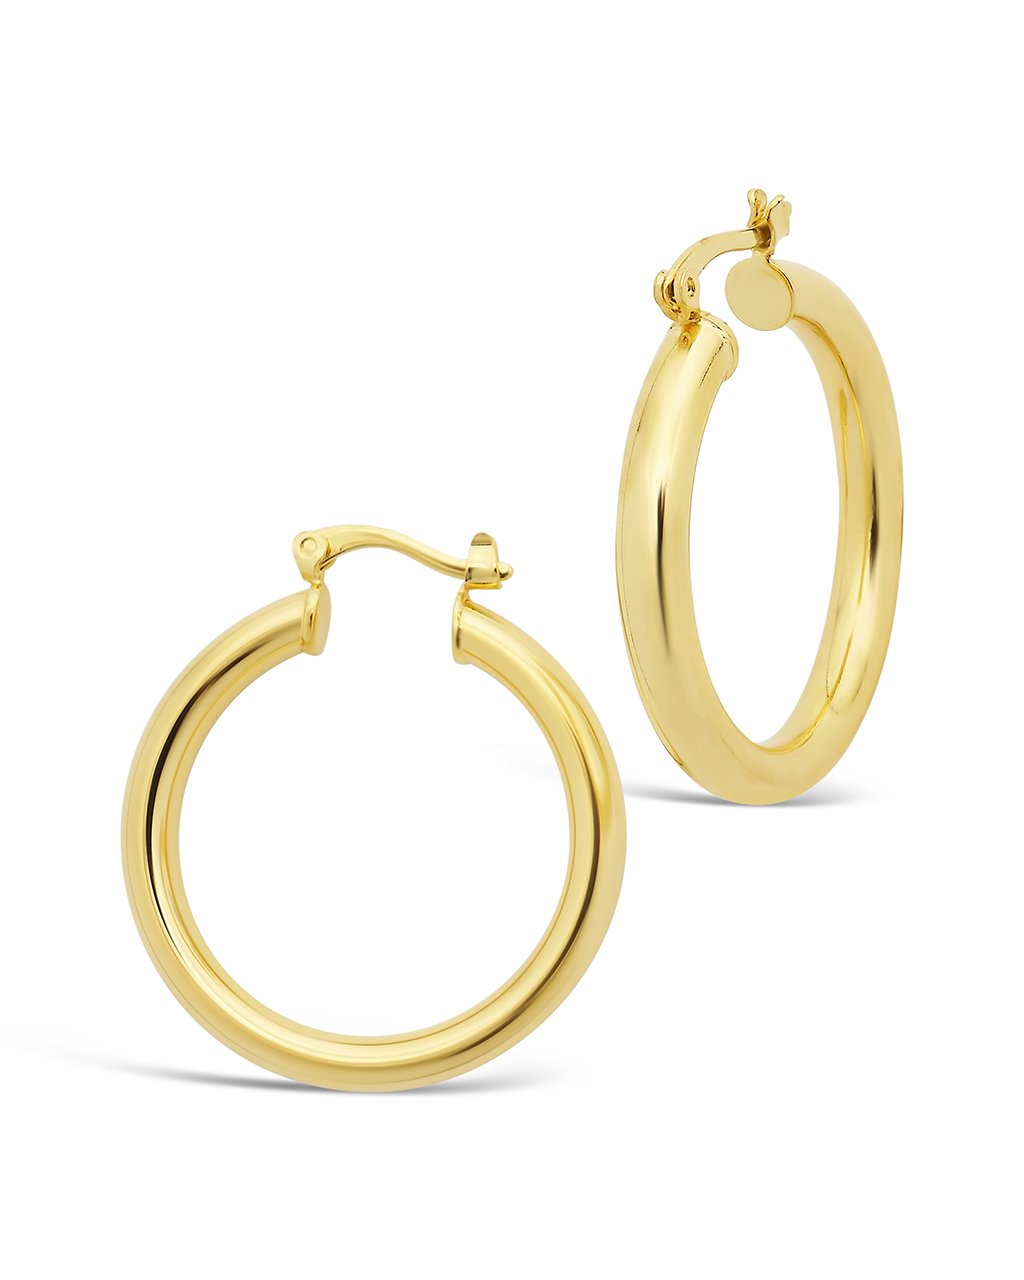 Sterling Forever - 50mm Resin Hoop Earrings - Fashion Statement Earrings -  14K Gold Plated Brass Fixings - Friction Clasp or Post Backing 